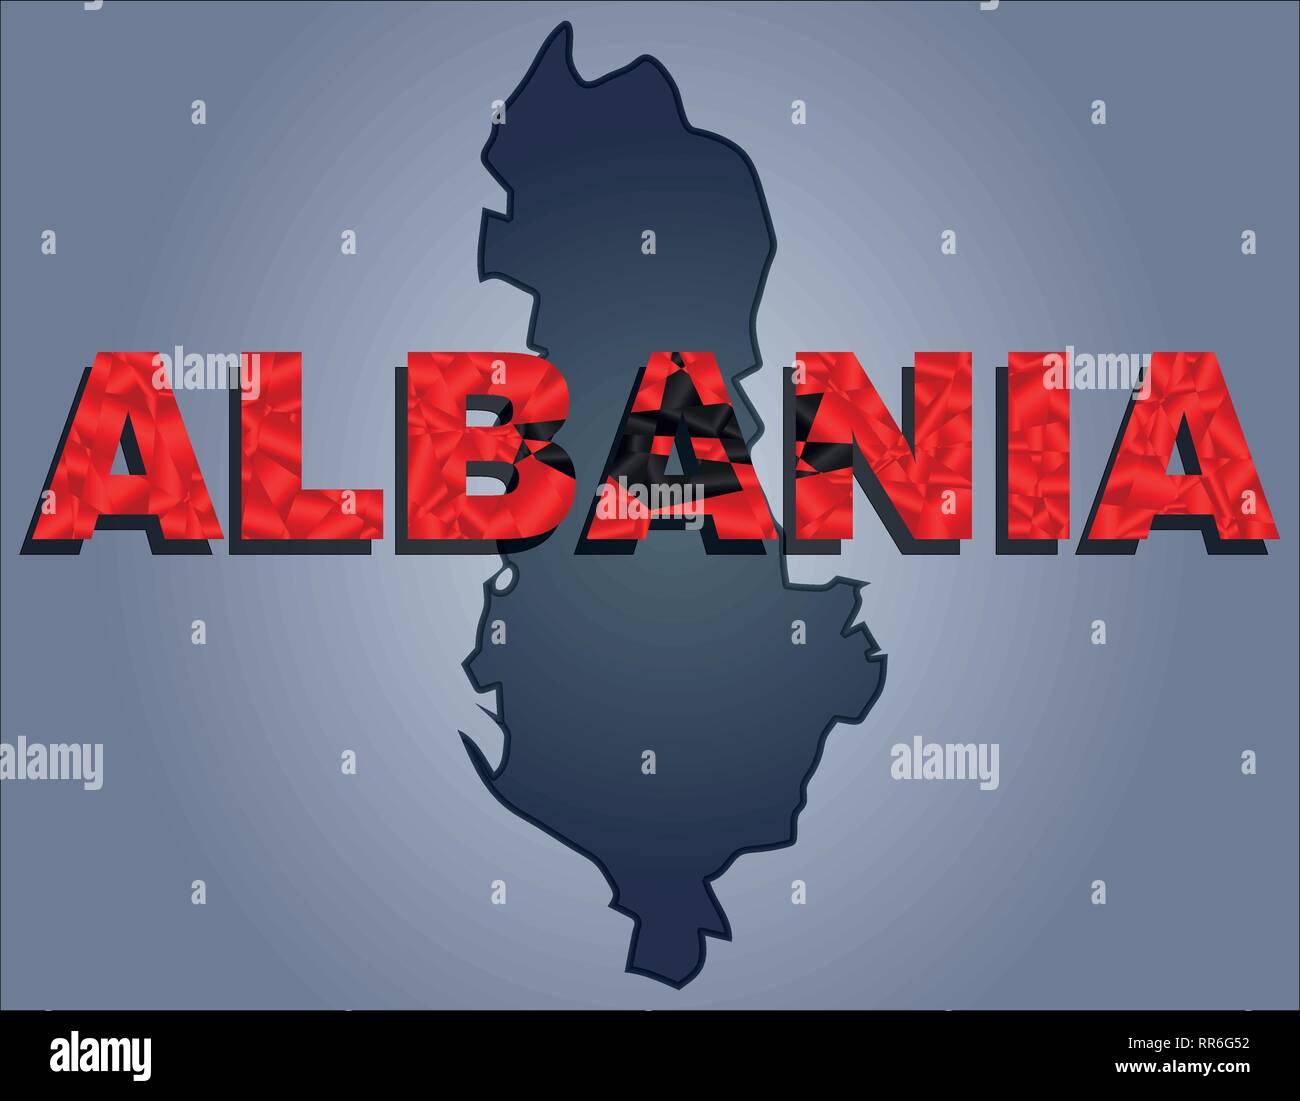 Albania design Stock Vector Images - Page 2 - Alamy